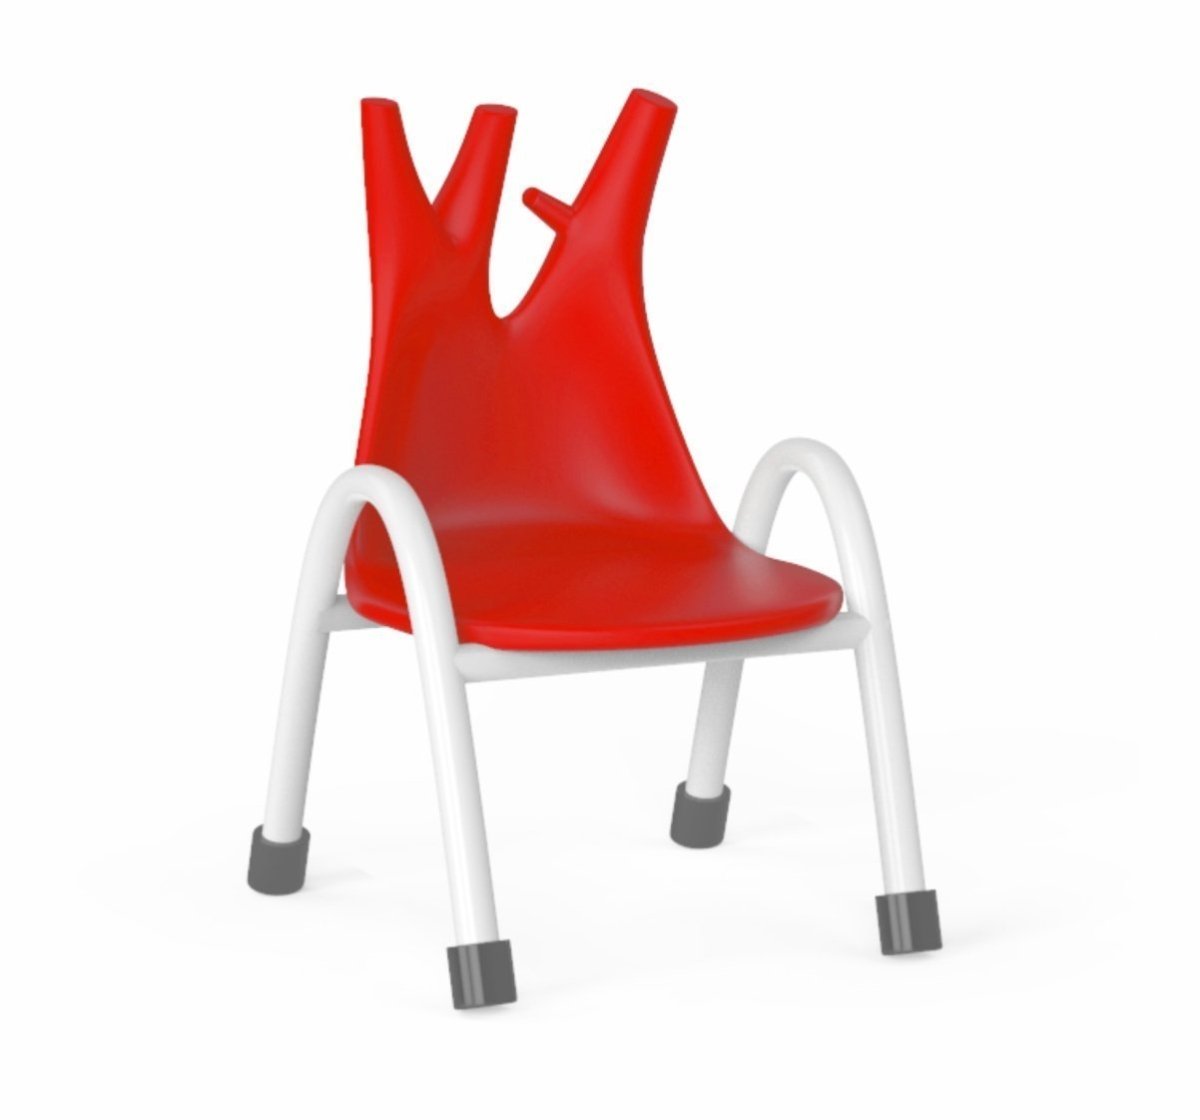 OK Play Trunk Chair - Red - FTFF000422